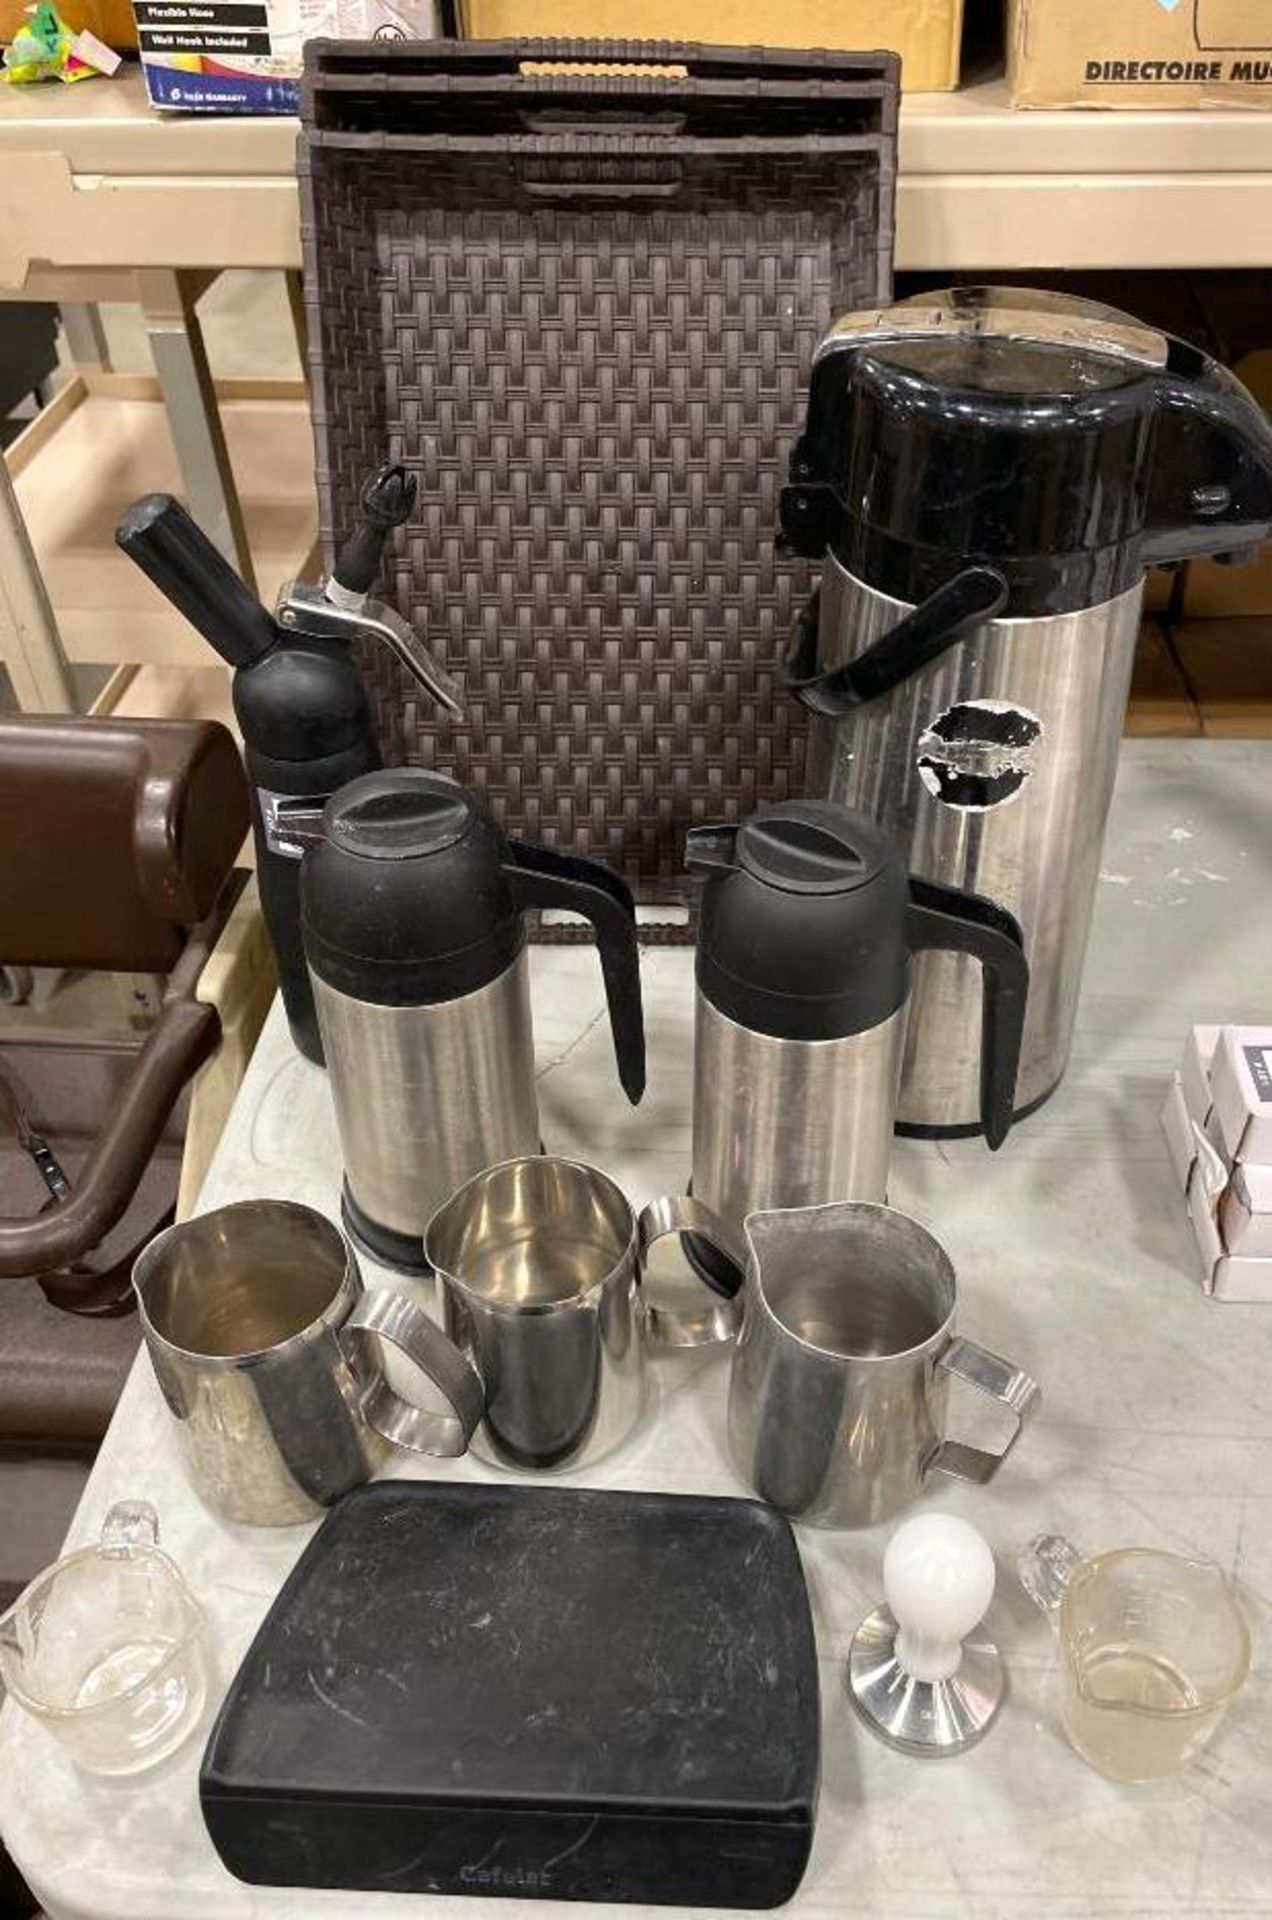 LOT OF ASSORTED CAFE EQUIPMENT INCLUDING: TAMPER, FROTHING PITCHERS, WHIPPED CREAM DISPENSER, AIRPOT